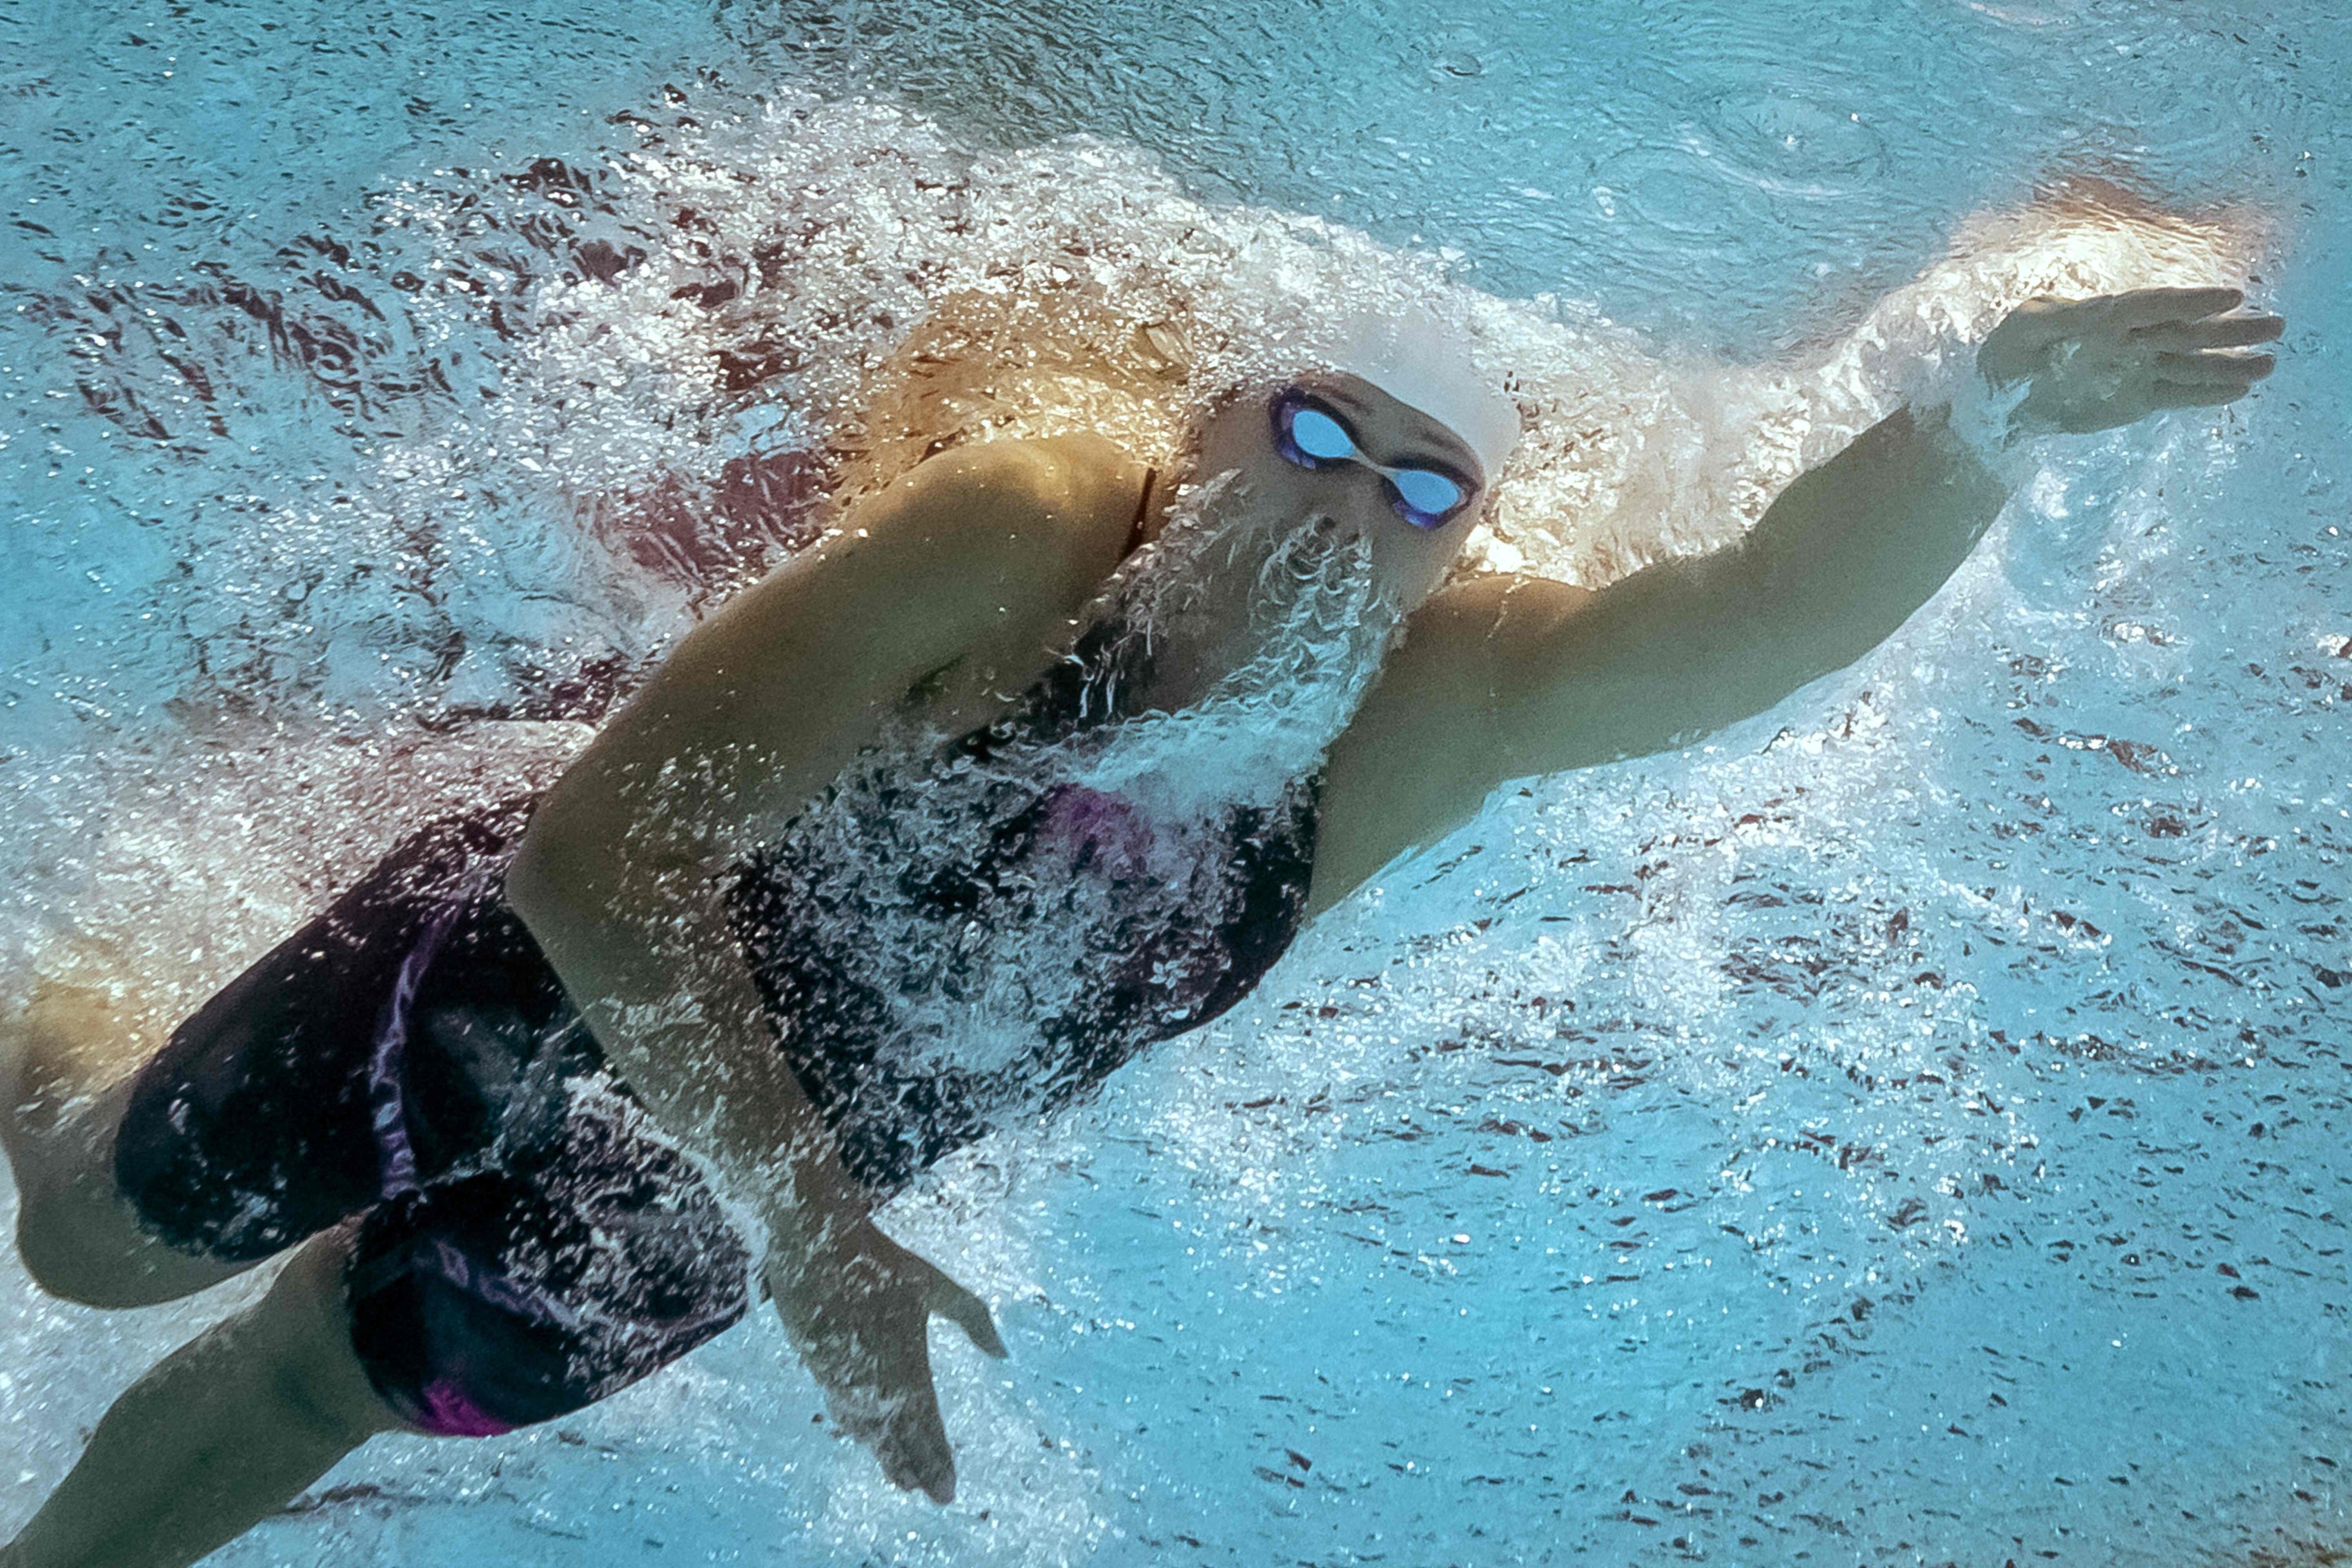 Siobhan Haughey competes in the 200m freestyle at the 2019 World Championships in Gwangju, South Korea. Photo: AFP